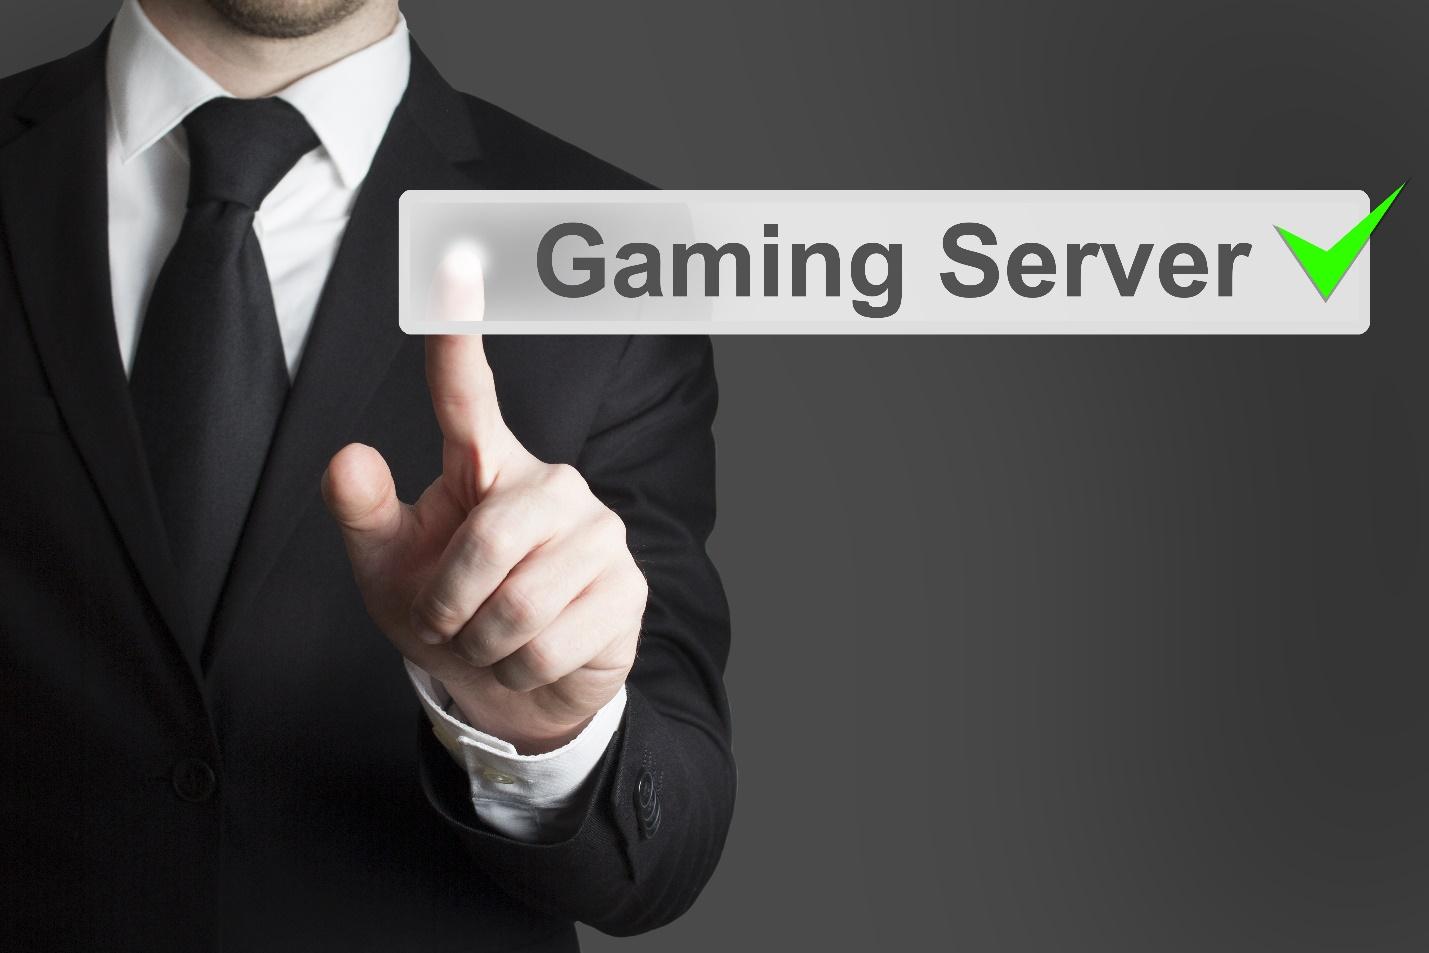 Dedicated game server rental offers the best gaming experience: fast, secure, reliable.